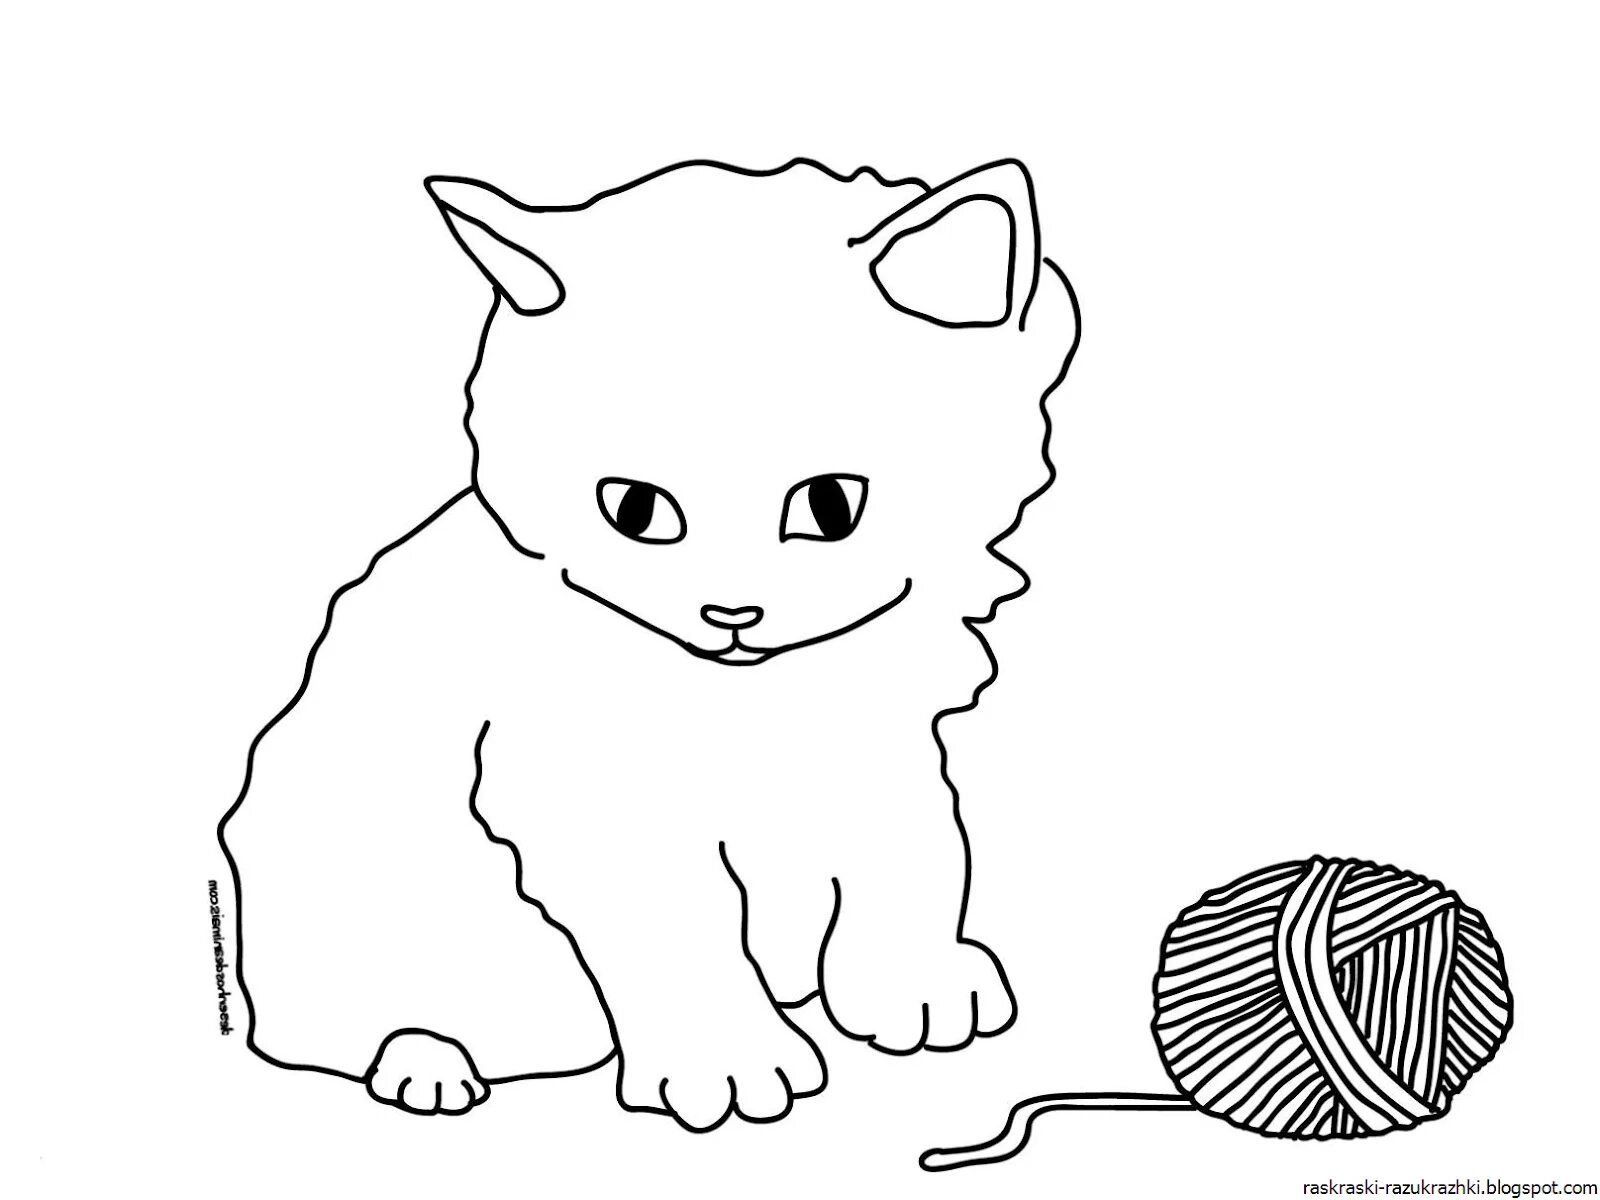 Witty cat coloring book for kids